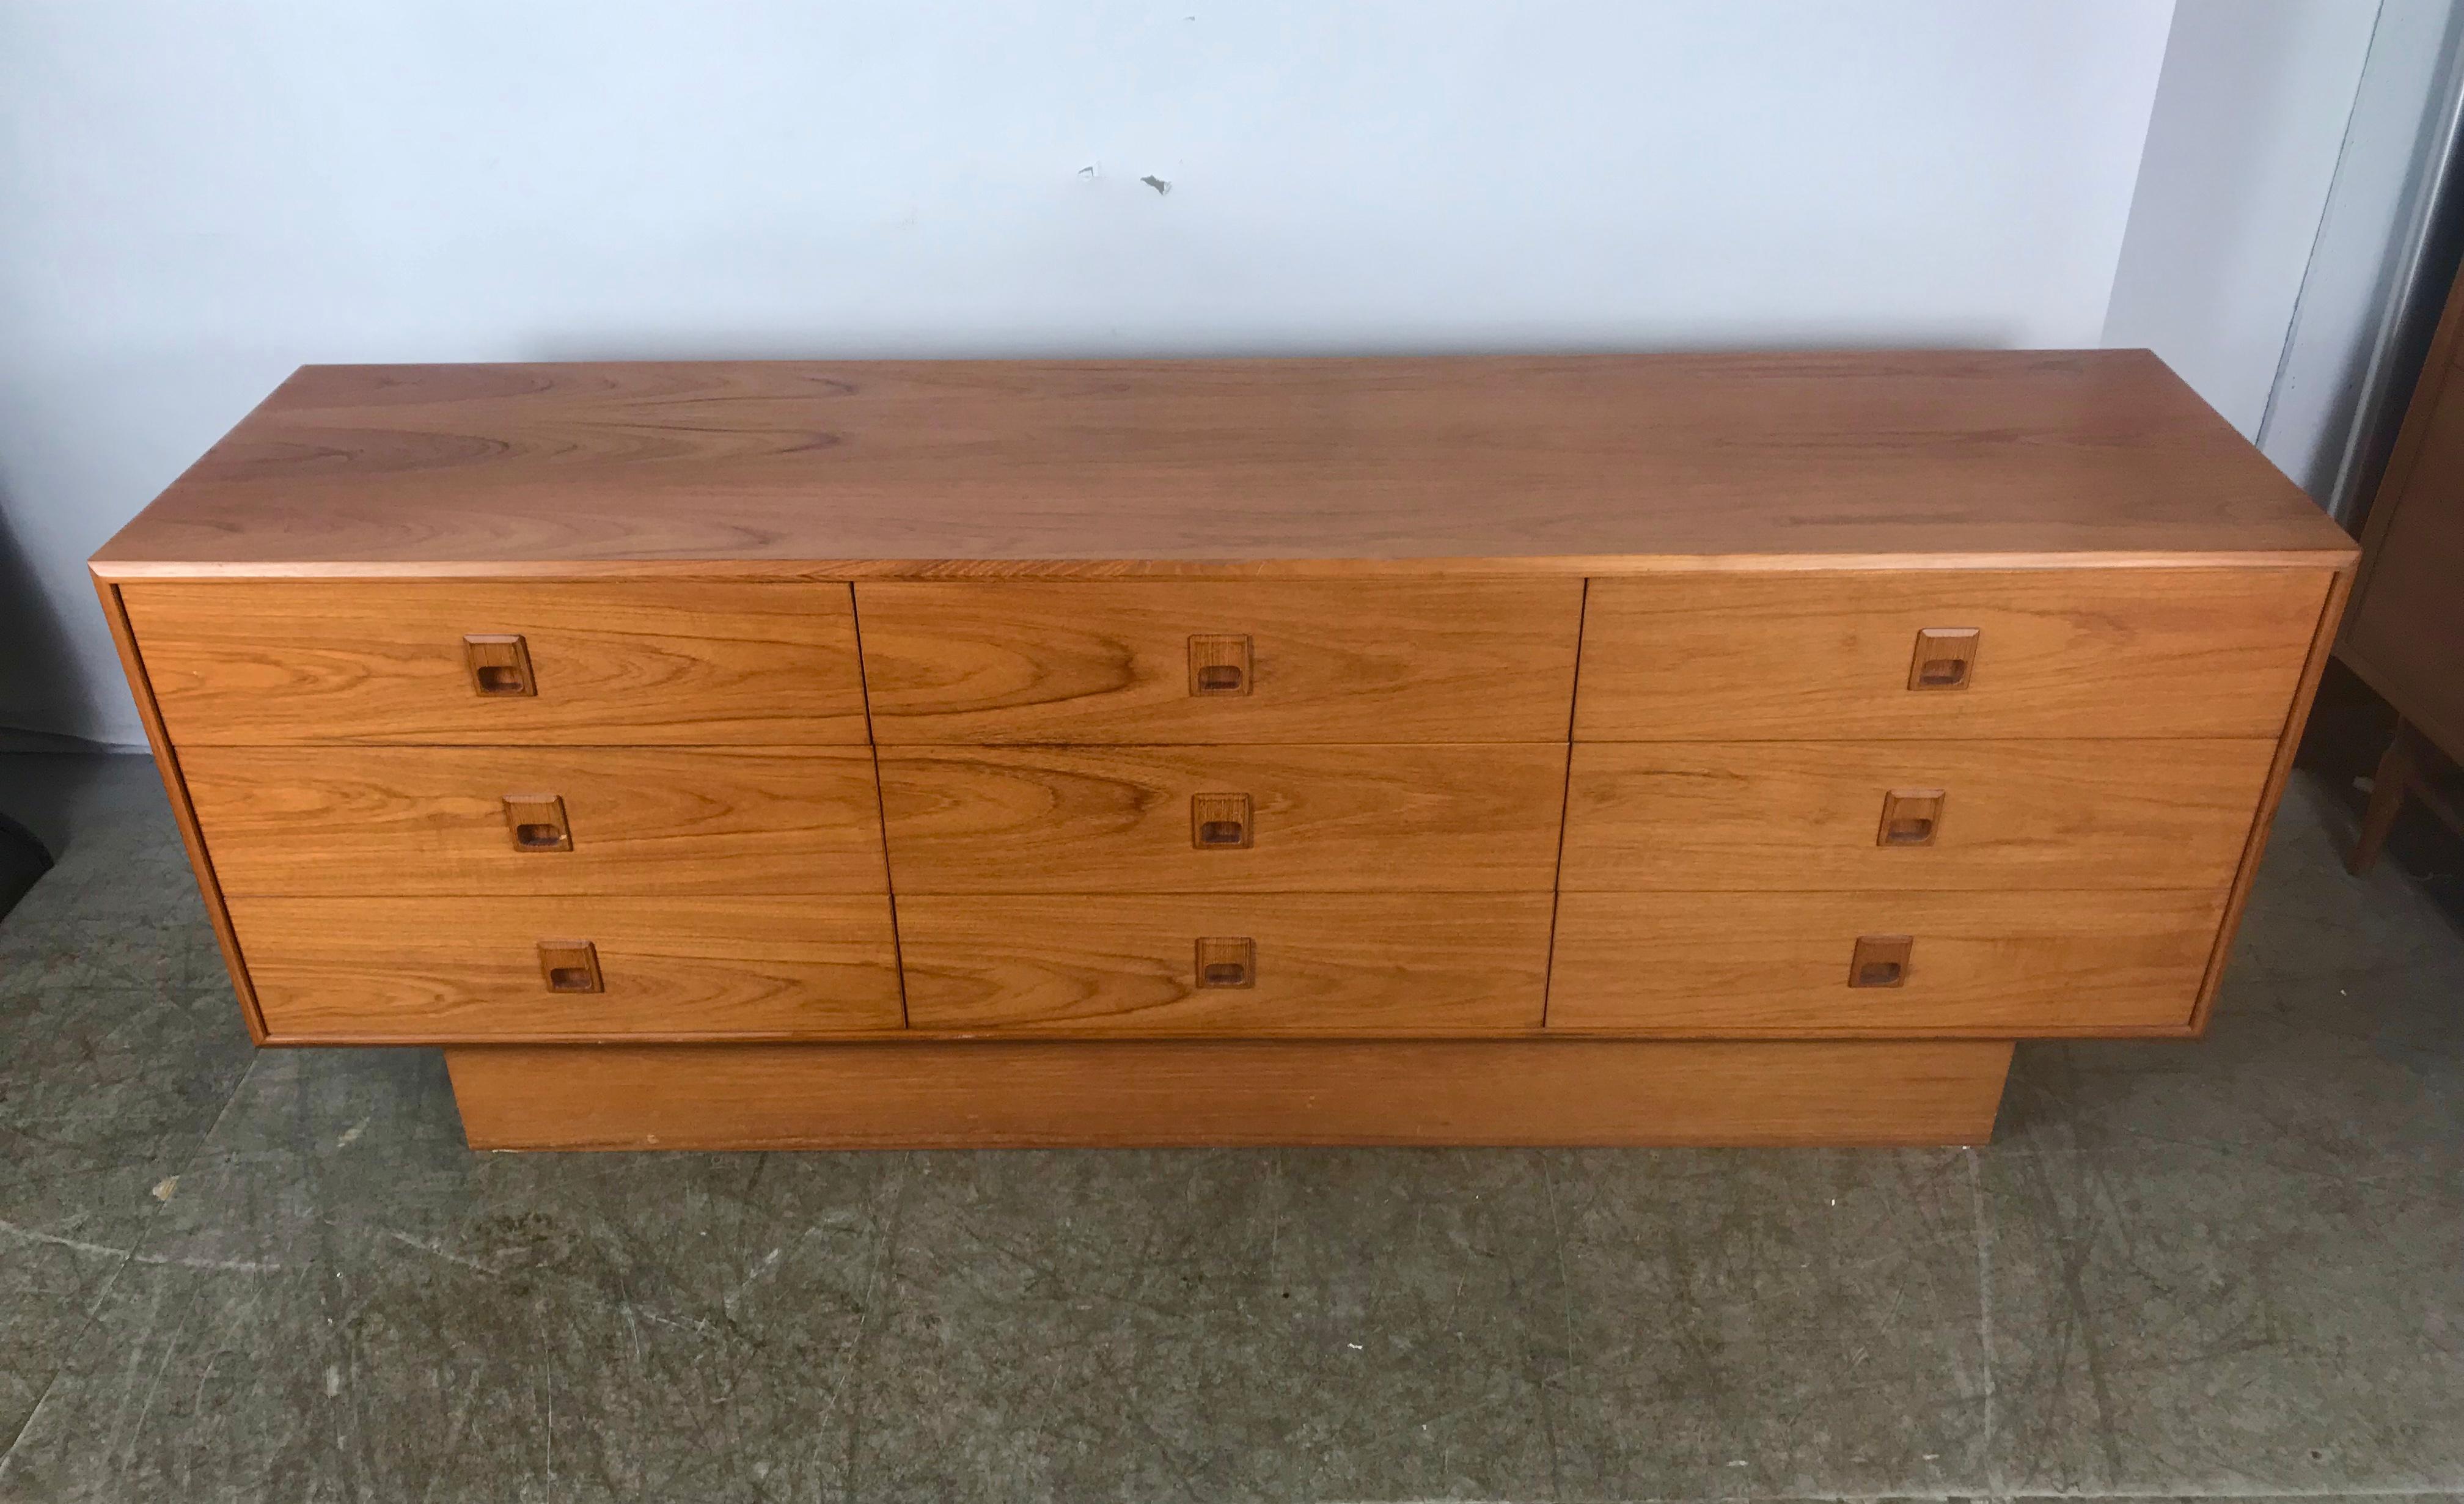 Classic Mid-Century Modern 9-drawer teak dresser /credenza. Beautiful teak veneer wood graining, Classic styling, generous storage. Hand delivery avail to New York City or anywhere en rote from Buffalo NY.